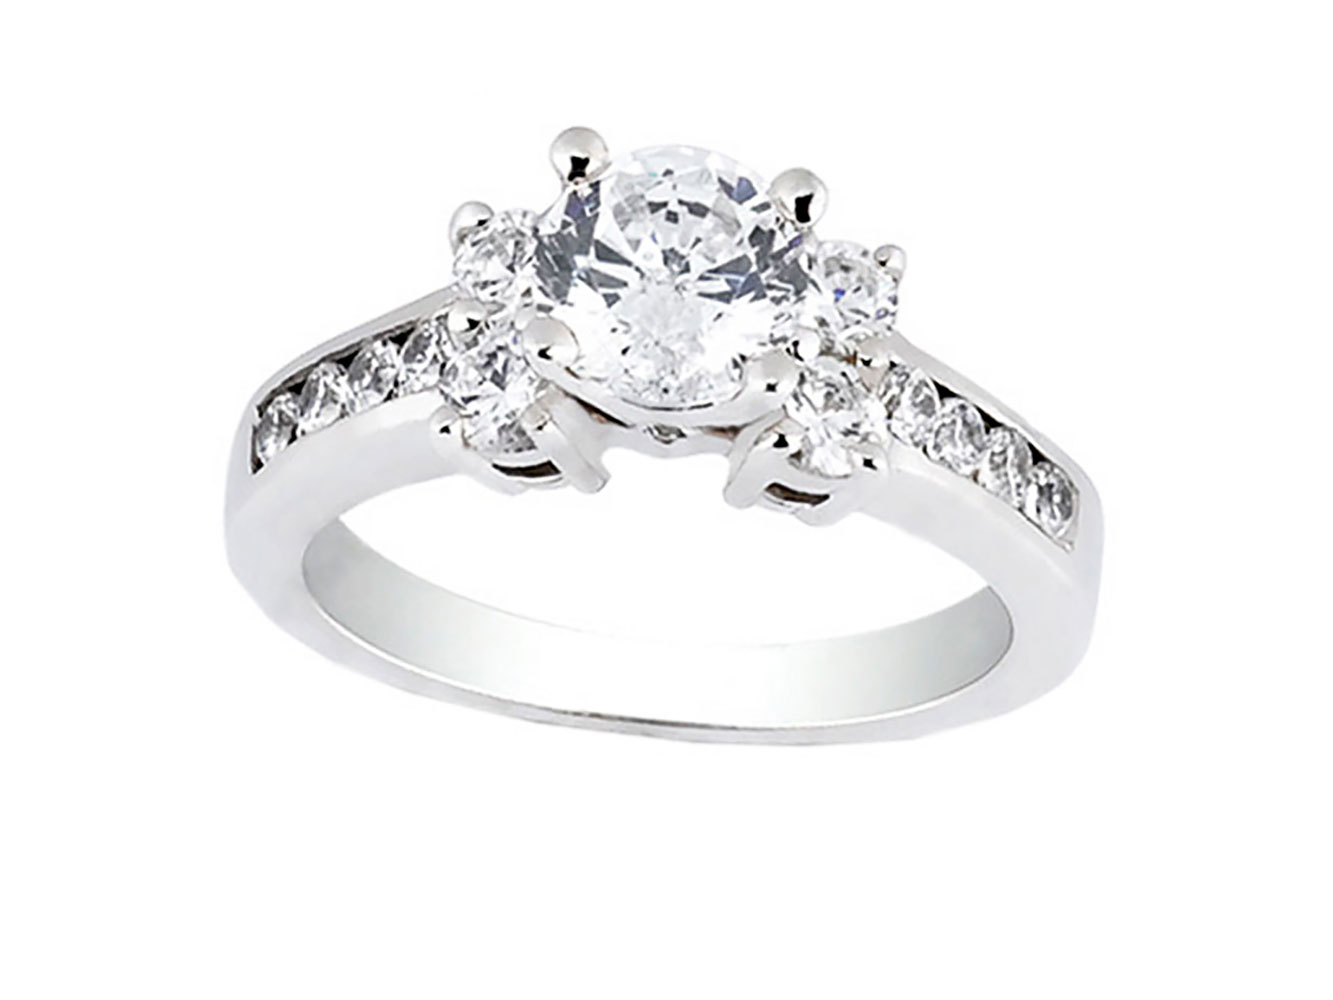 1.75 Ct Round Cut Solitaire Engagement Wedding Ring Solid 14K White Gold 